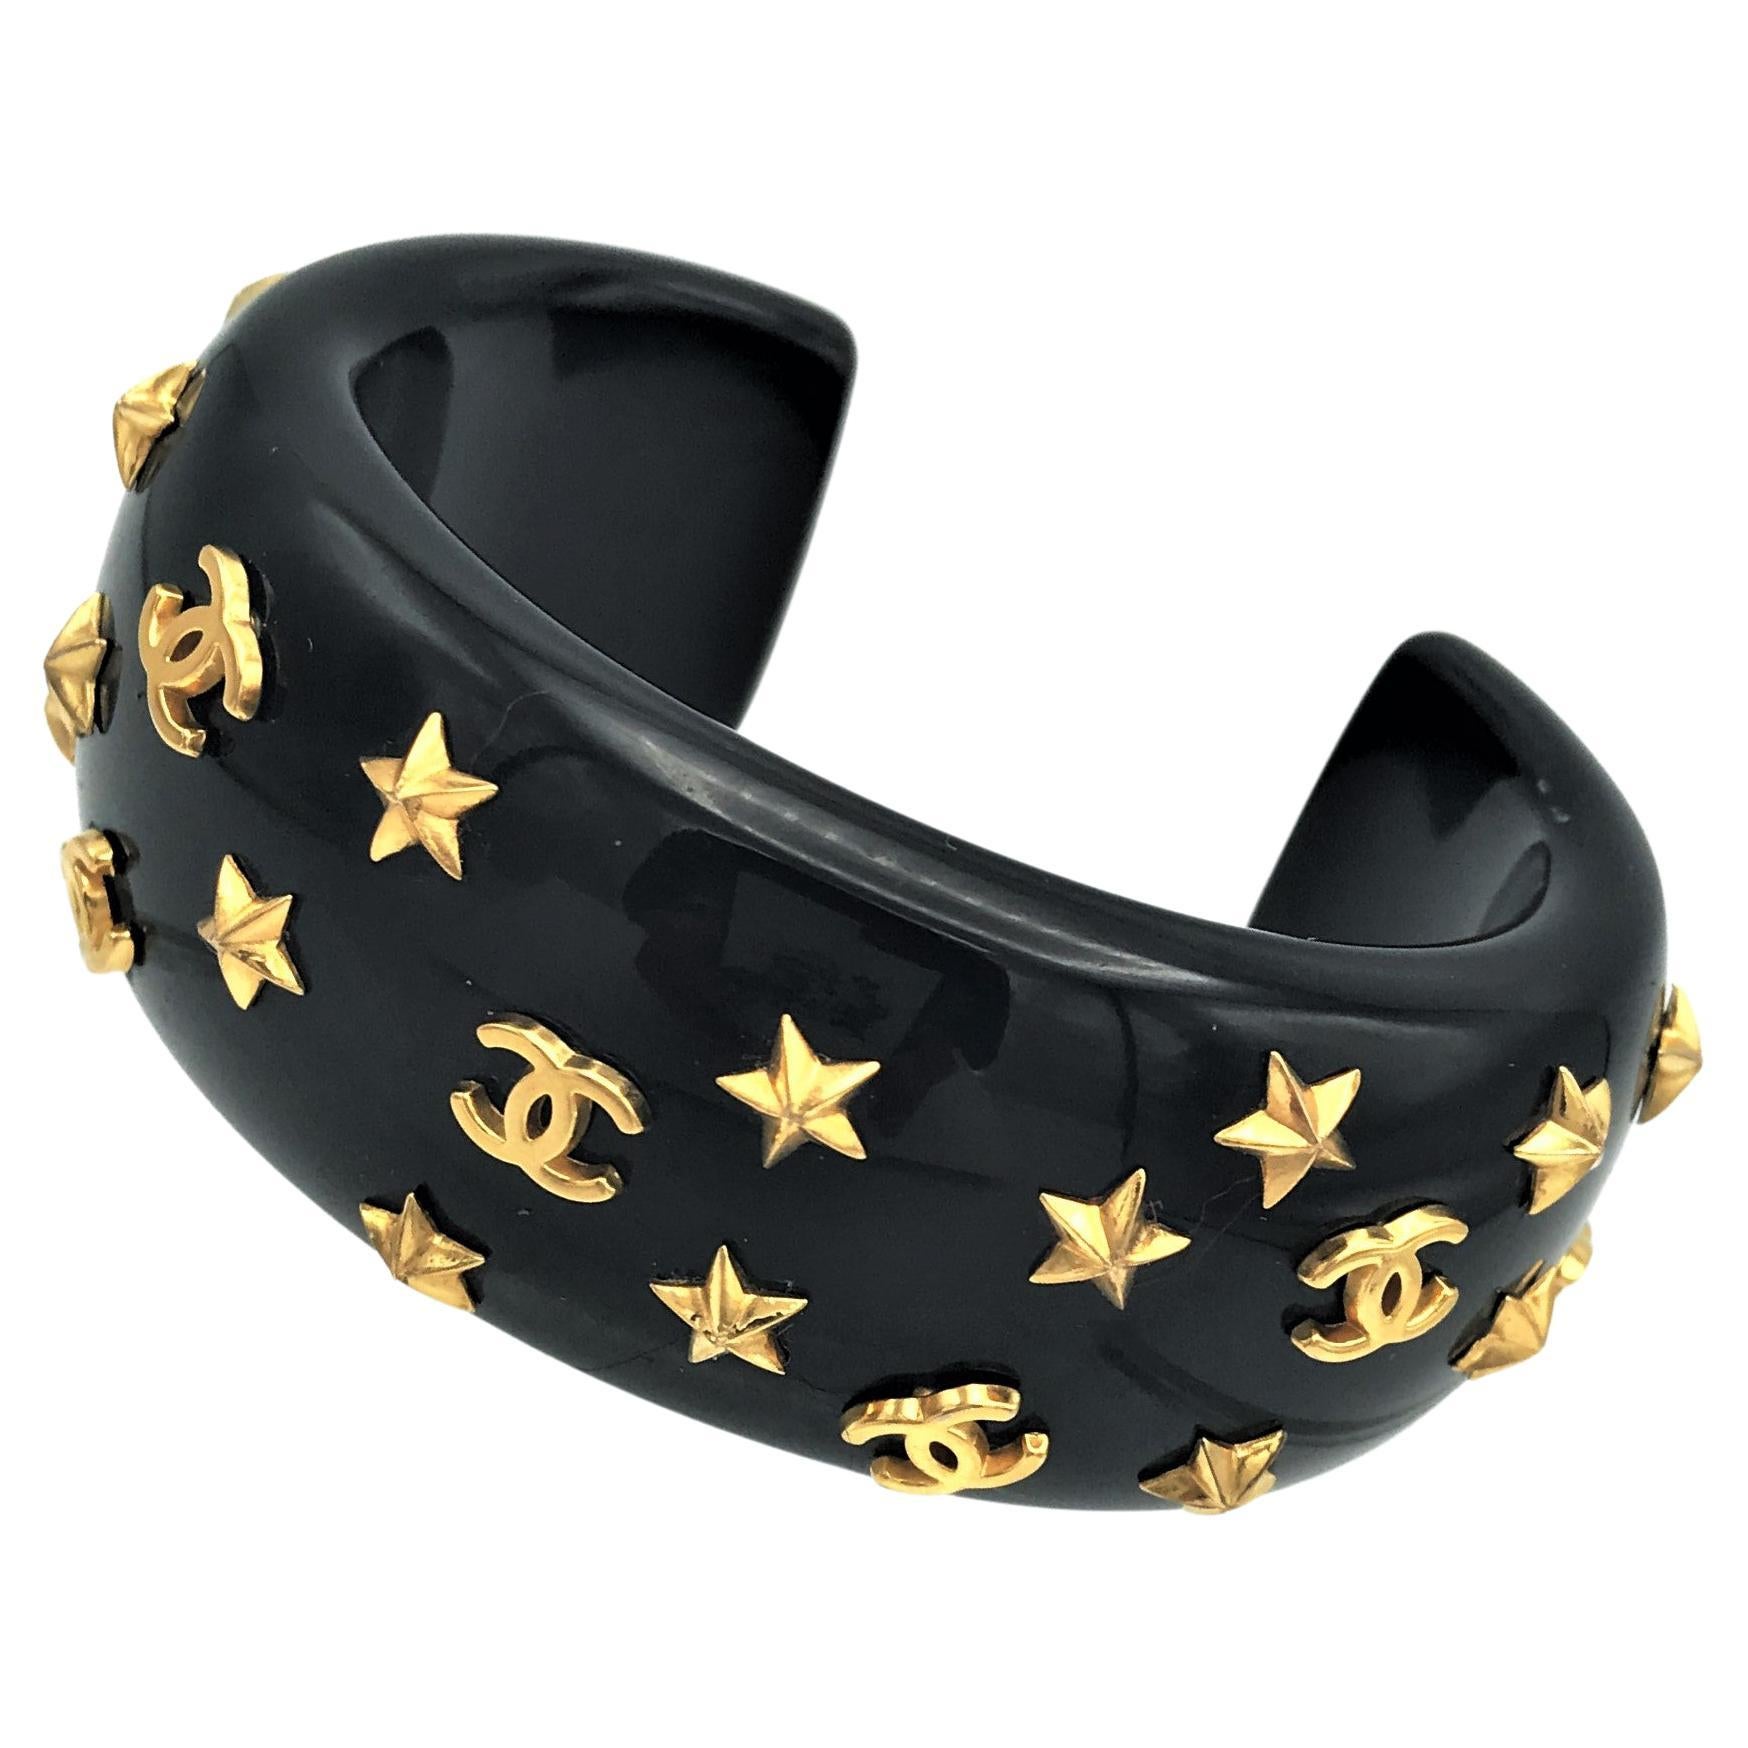 Chanel open bracelet, molded black acrylic signed 95 CC P with gold stars and CC